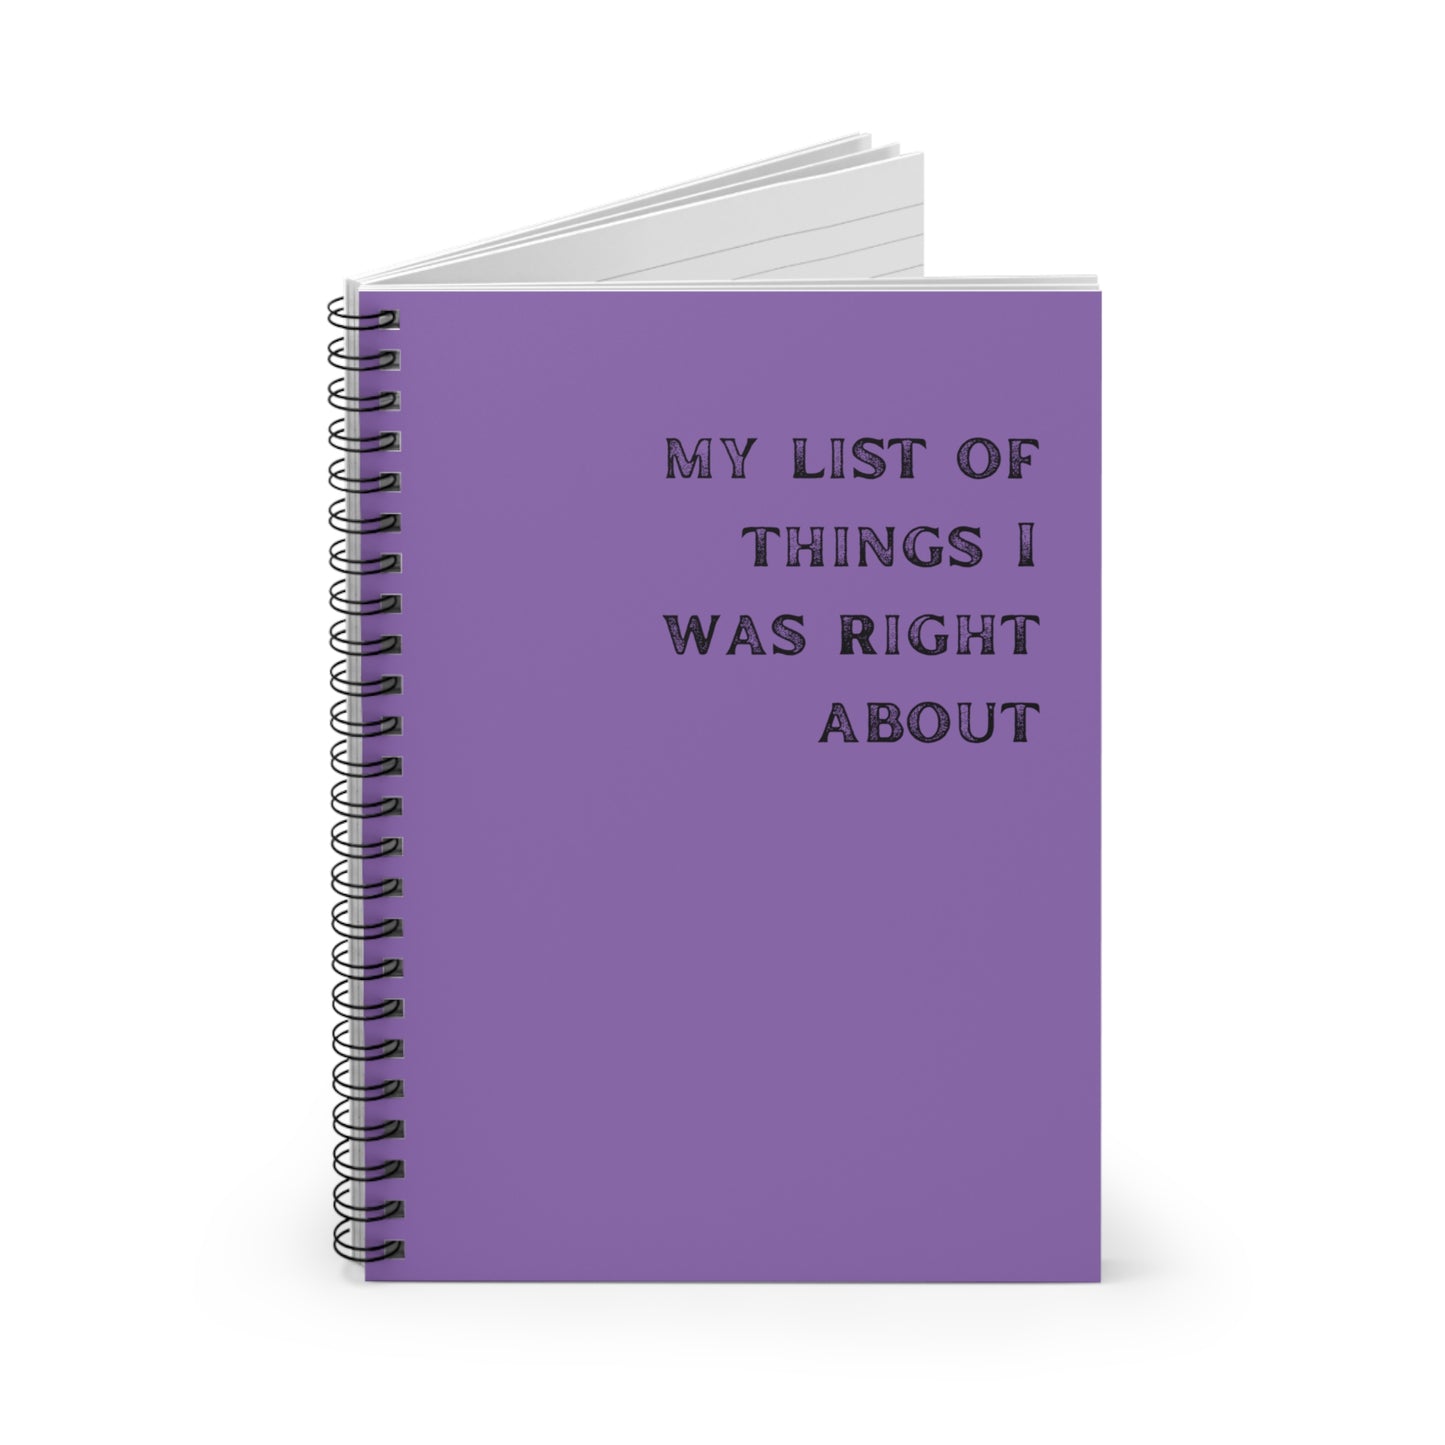 Funny Notebook, My list of things I'm right about, notebook, spiral, retirement gift, boss gift, early retirement, birthday gift